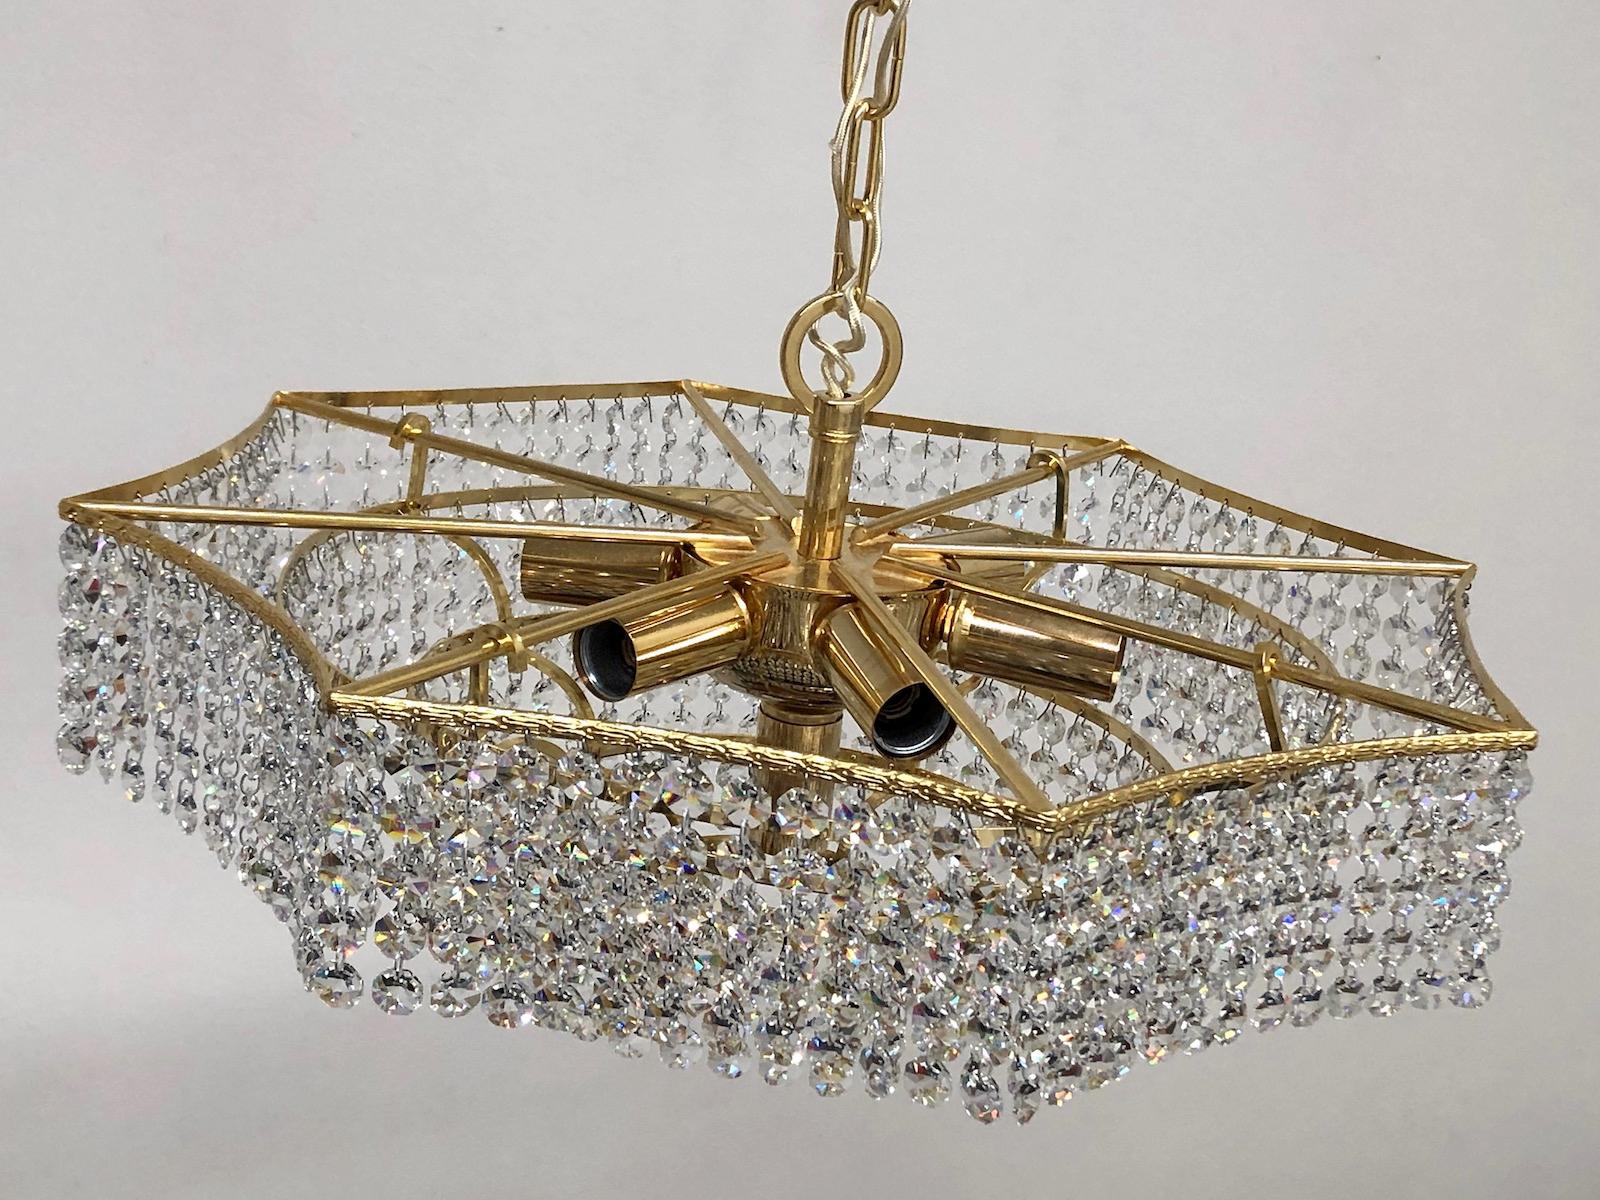 Brass and Crystal Glass Waterfall Chandelier, Richard Essig, Germany, 1960s For Sale 4